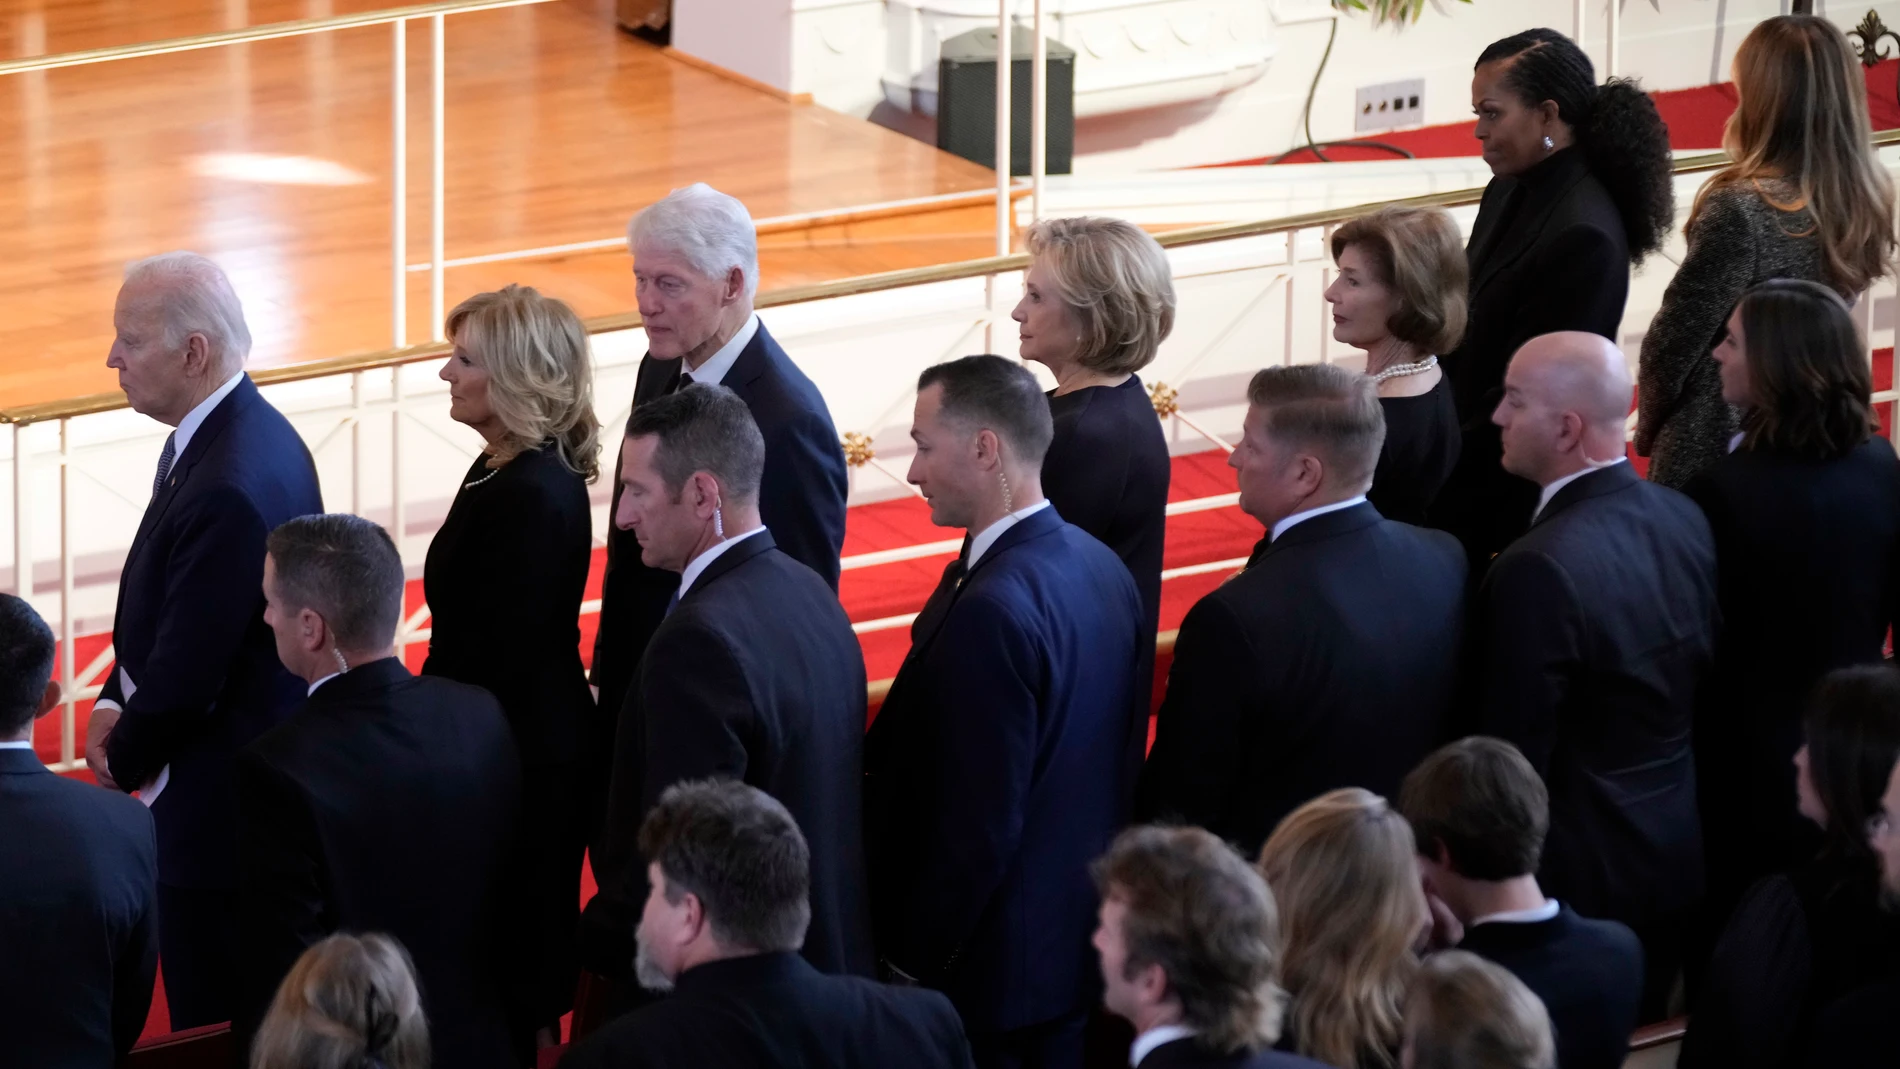 From left, President Joe Biden, first lady Jill Biden, former President Bill Clinton, former Secretary of State Hillary Clinton, former first lady Laura Bush, former first lady Michelle Obama and former first lady Michelle Obama prepare to depart after a tribute service for former first lady Rosalynn Carter, at Glenn Memorial Church, Tuesday, Nov. 28, 2023, in Atlanta. (AP Photo/Andrew Harnik)